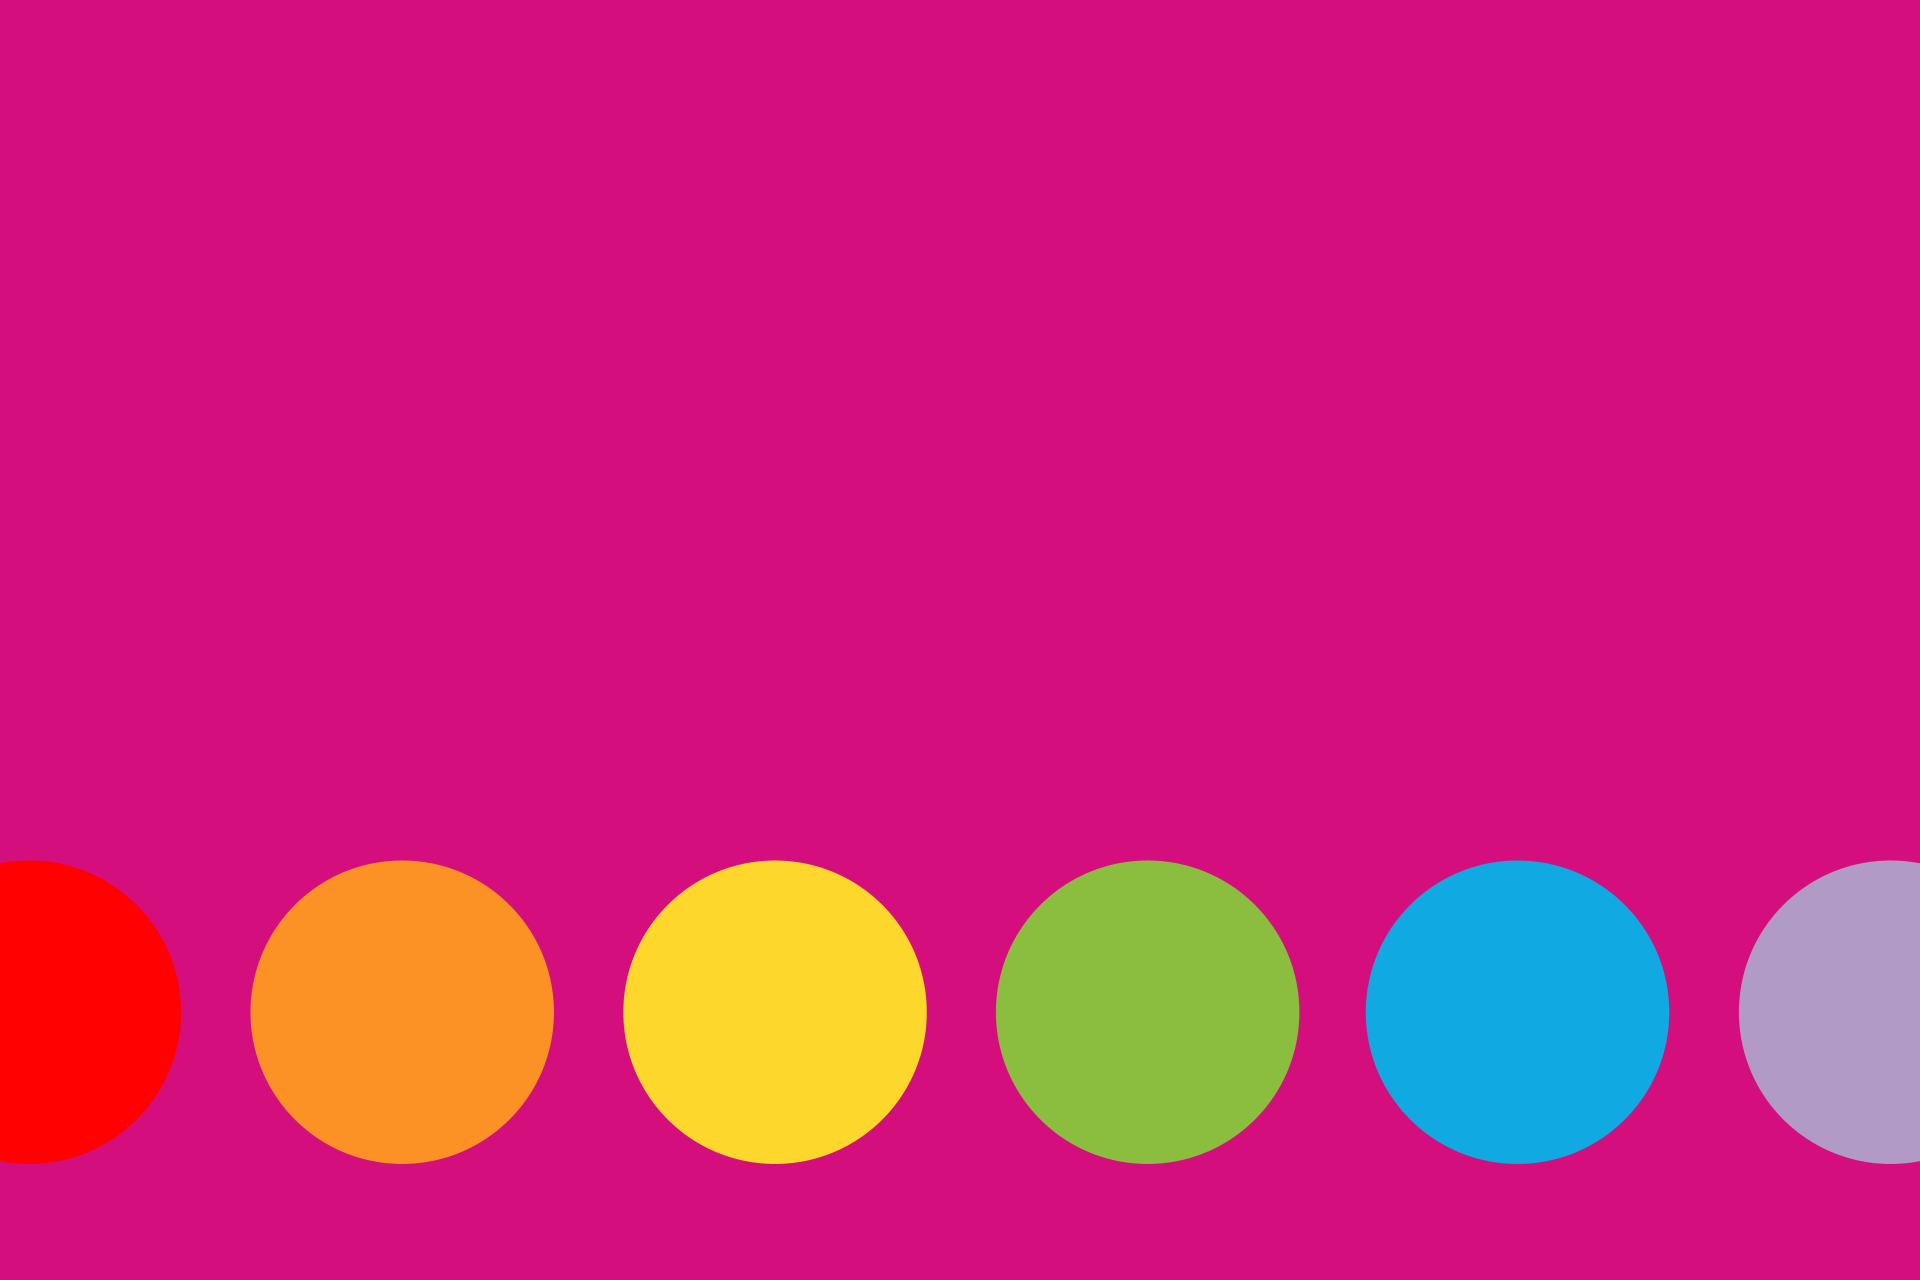 Bright pink background with large rainbow coloured dots in a line.